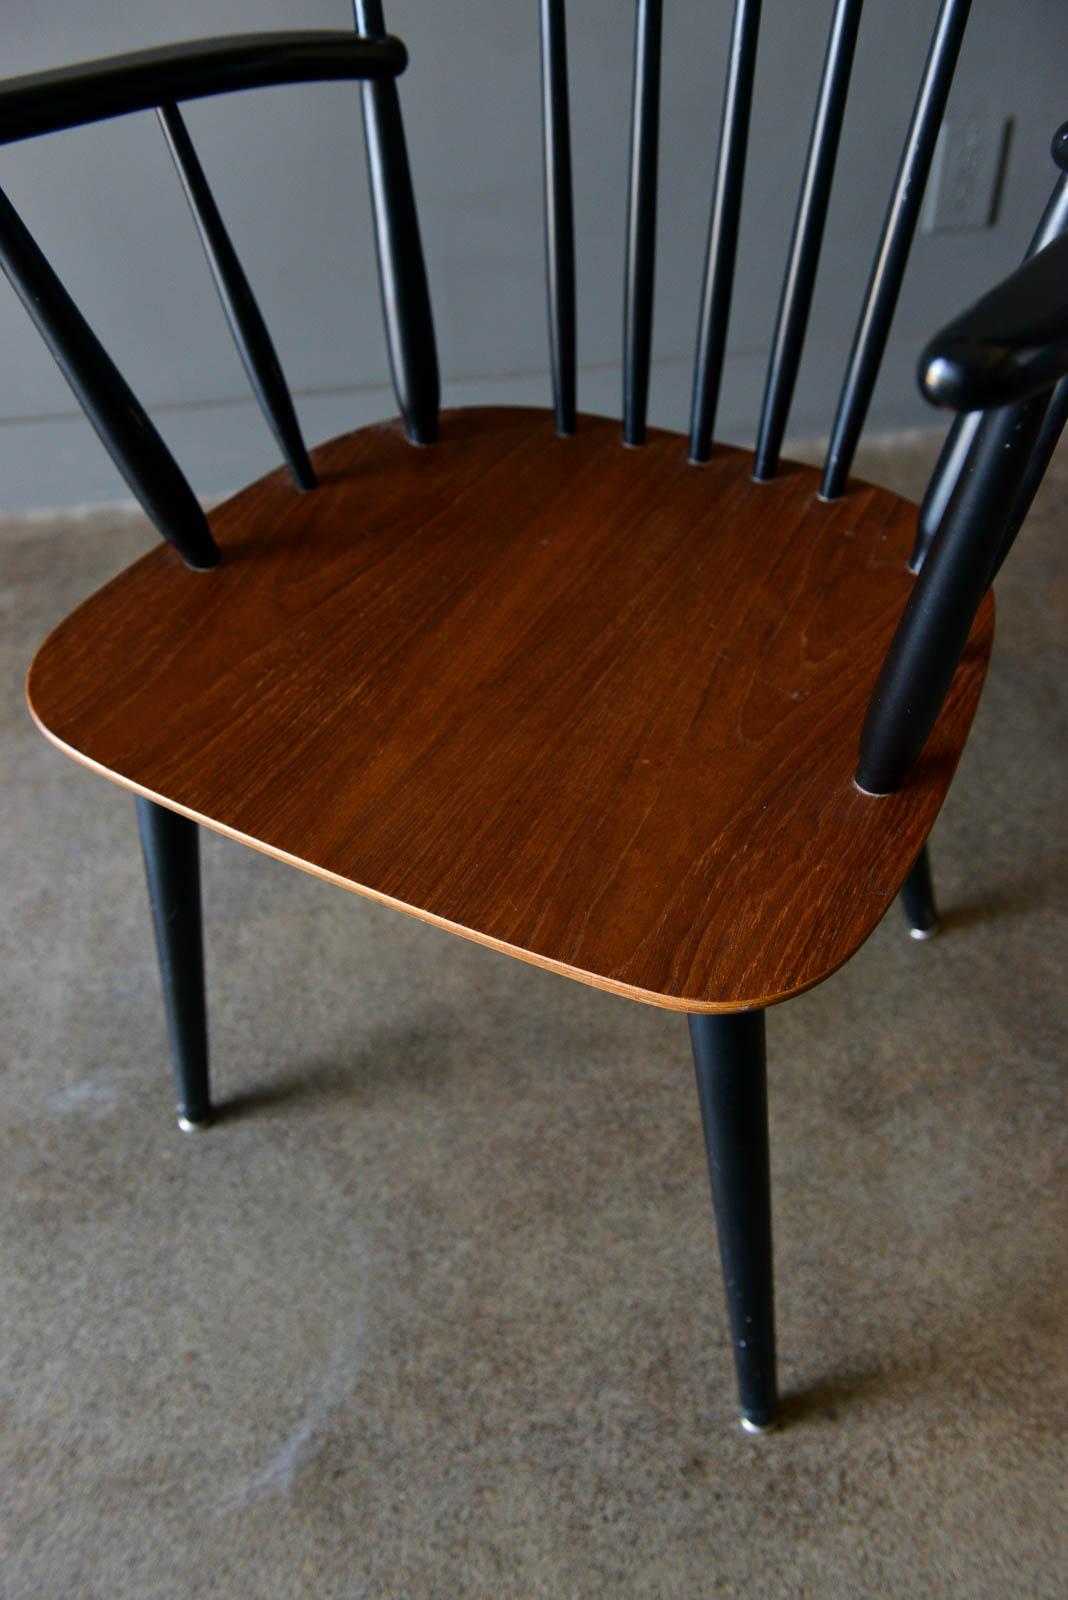 Danish Spindle Back Arm Chair by Thomas Harlev for Farstrup, 1960 For Sale 4